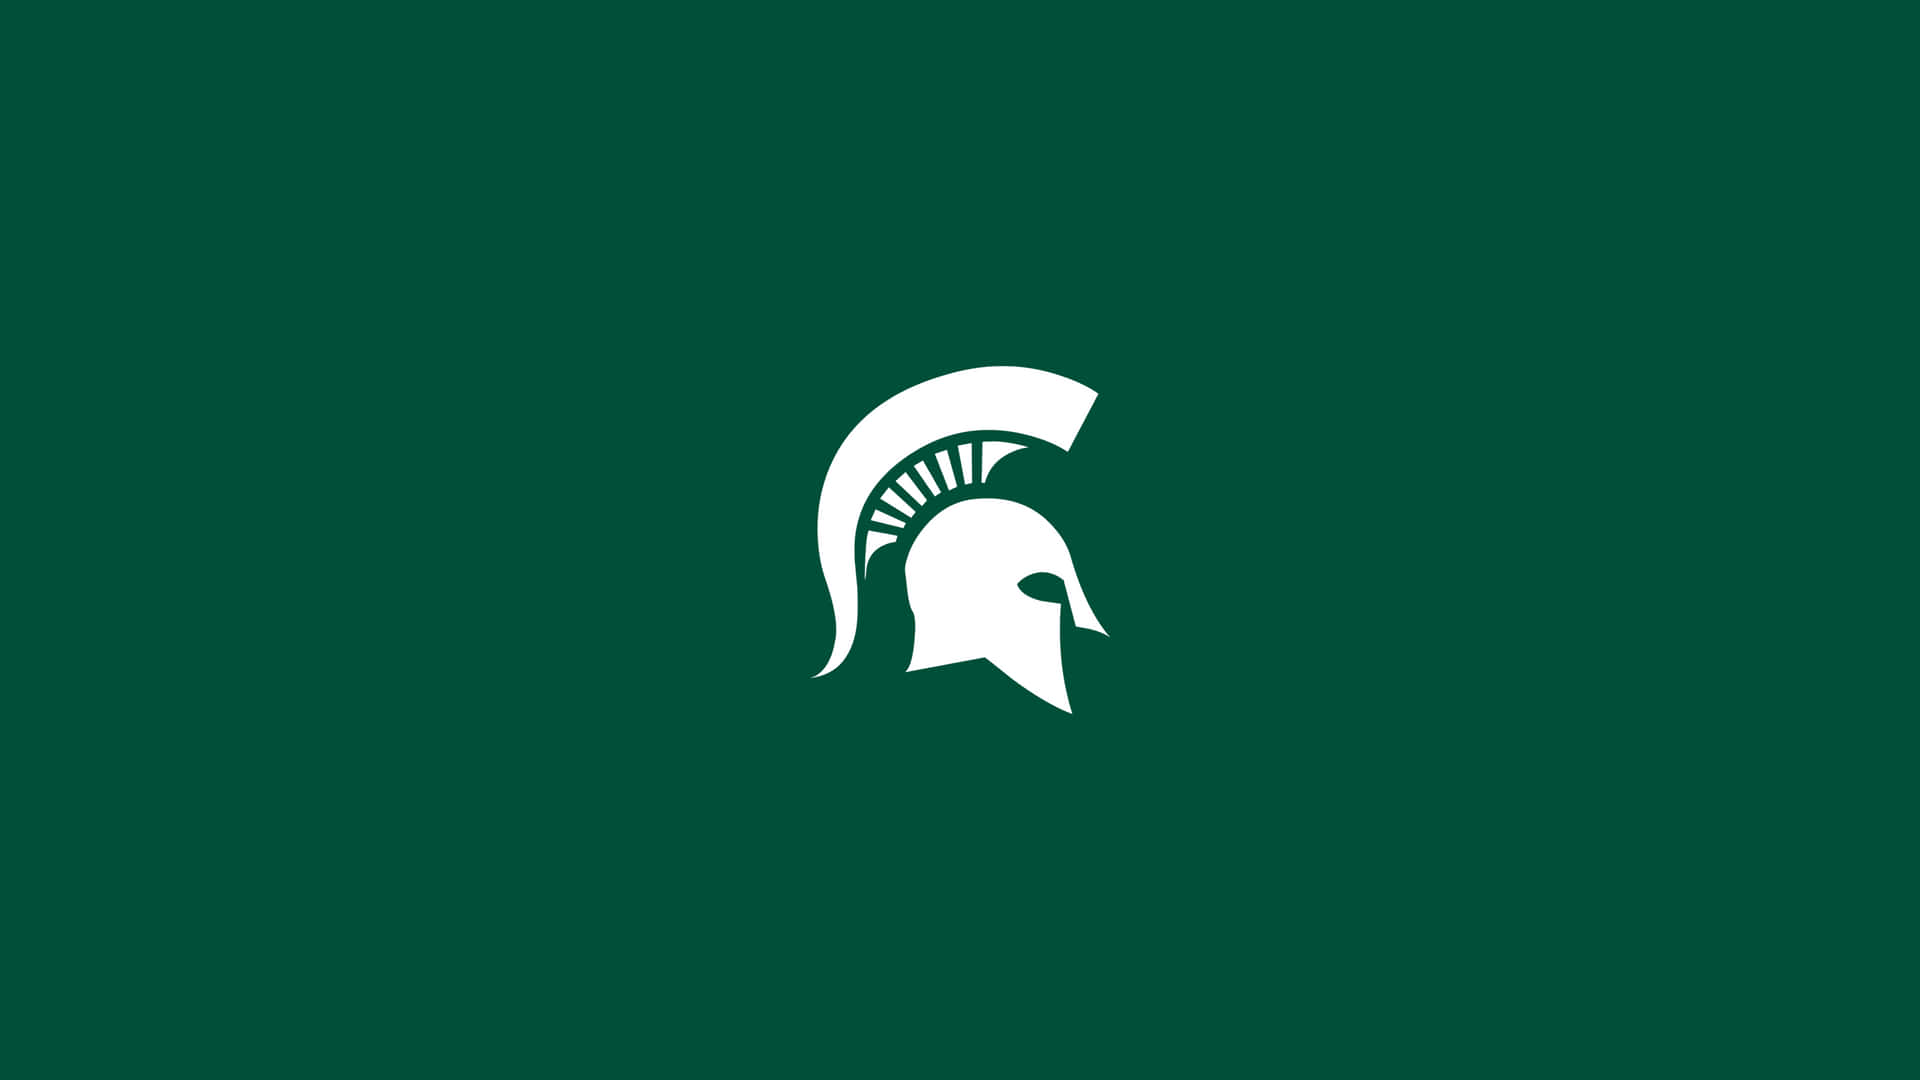 Michigan State Spartans Logo On A Green Background Background